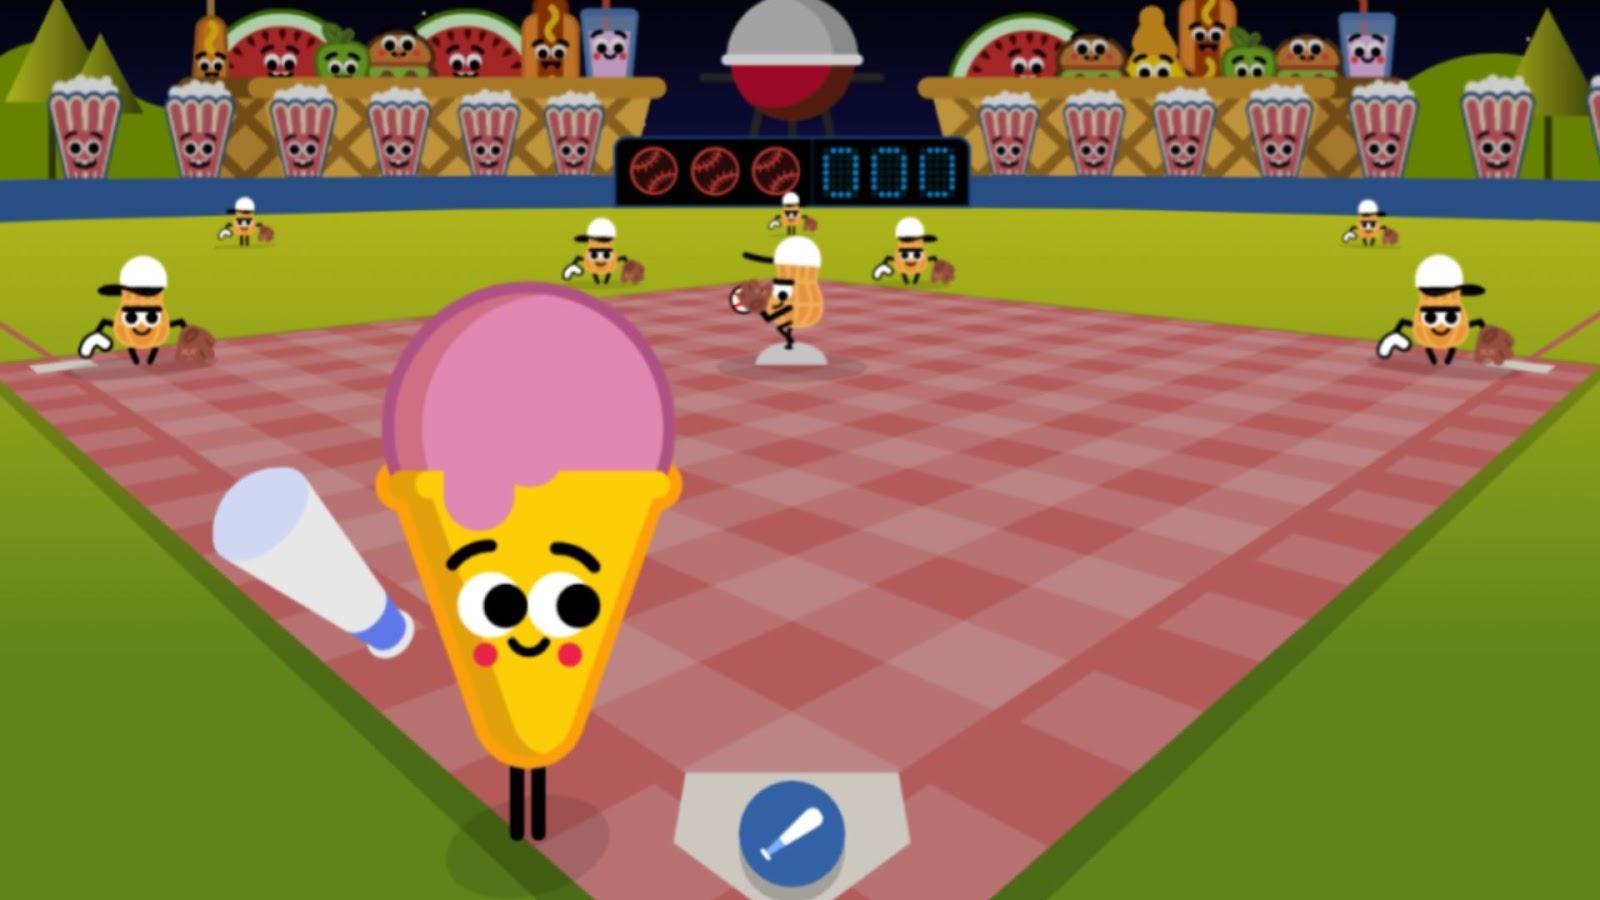 The Best Google Doodle Games to Have a Fun Time for FreeLDPlayer's